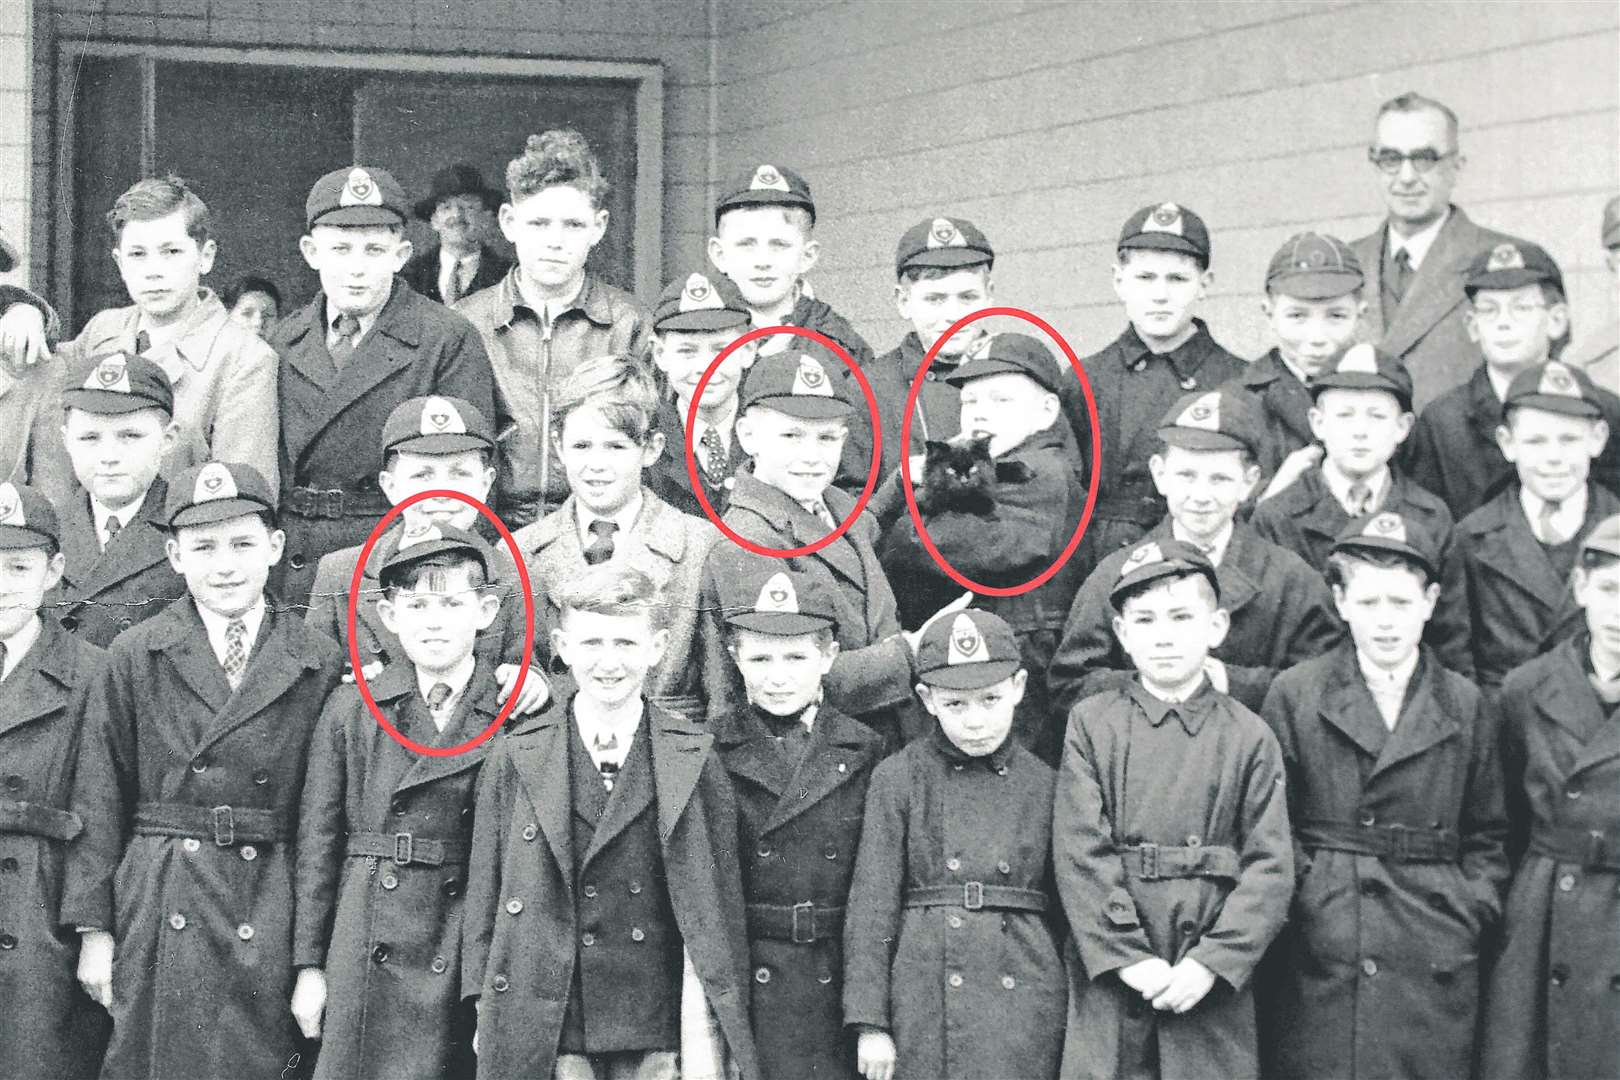 Long before they were rock legends, Rolling Stones Keith Richards (bottom row 3rd from left), Mick Jagger (right of centre, holding a black cat) and Peter Holland (immediately to the left of Mick Jagger) were pictured in 1954 at Wentworth School, Dartford. Picture: SWNS